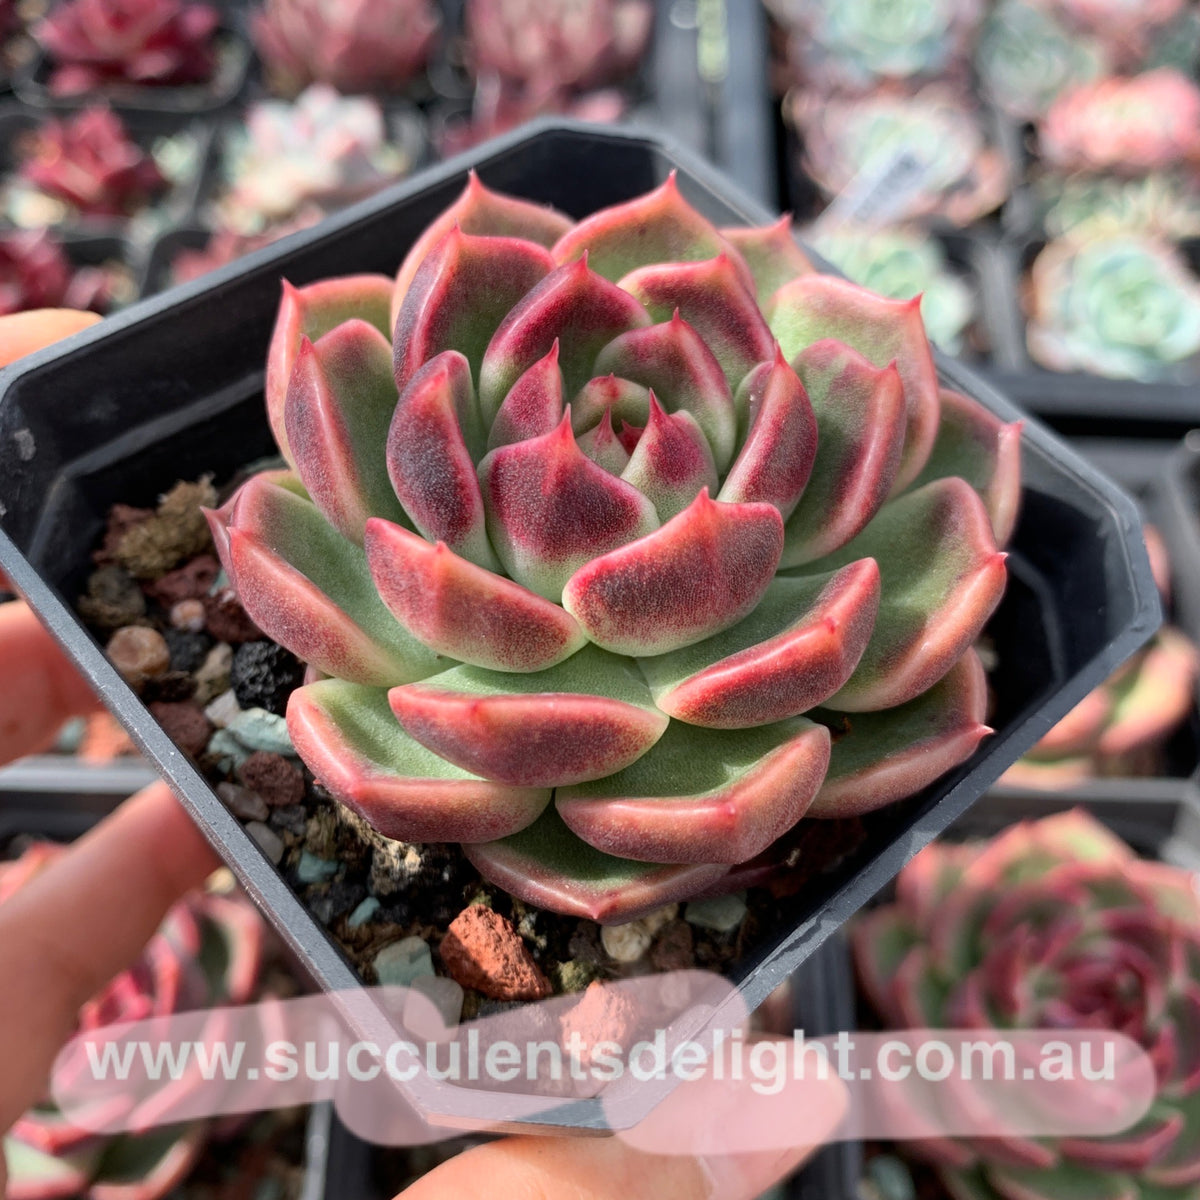 Succulents Delight's Hybrids 杂交新品– Page 6